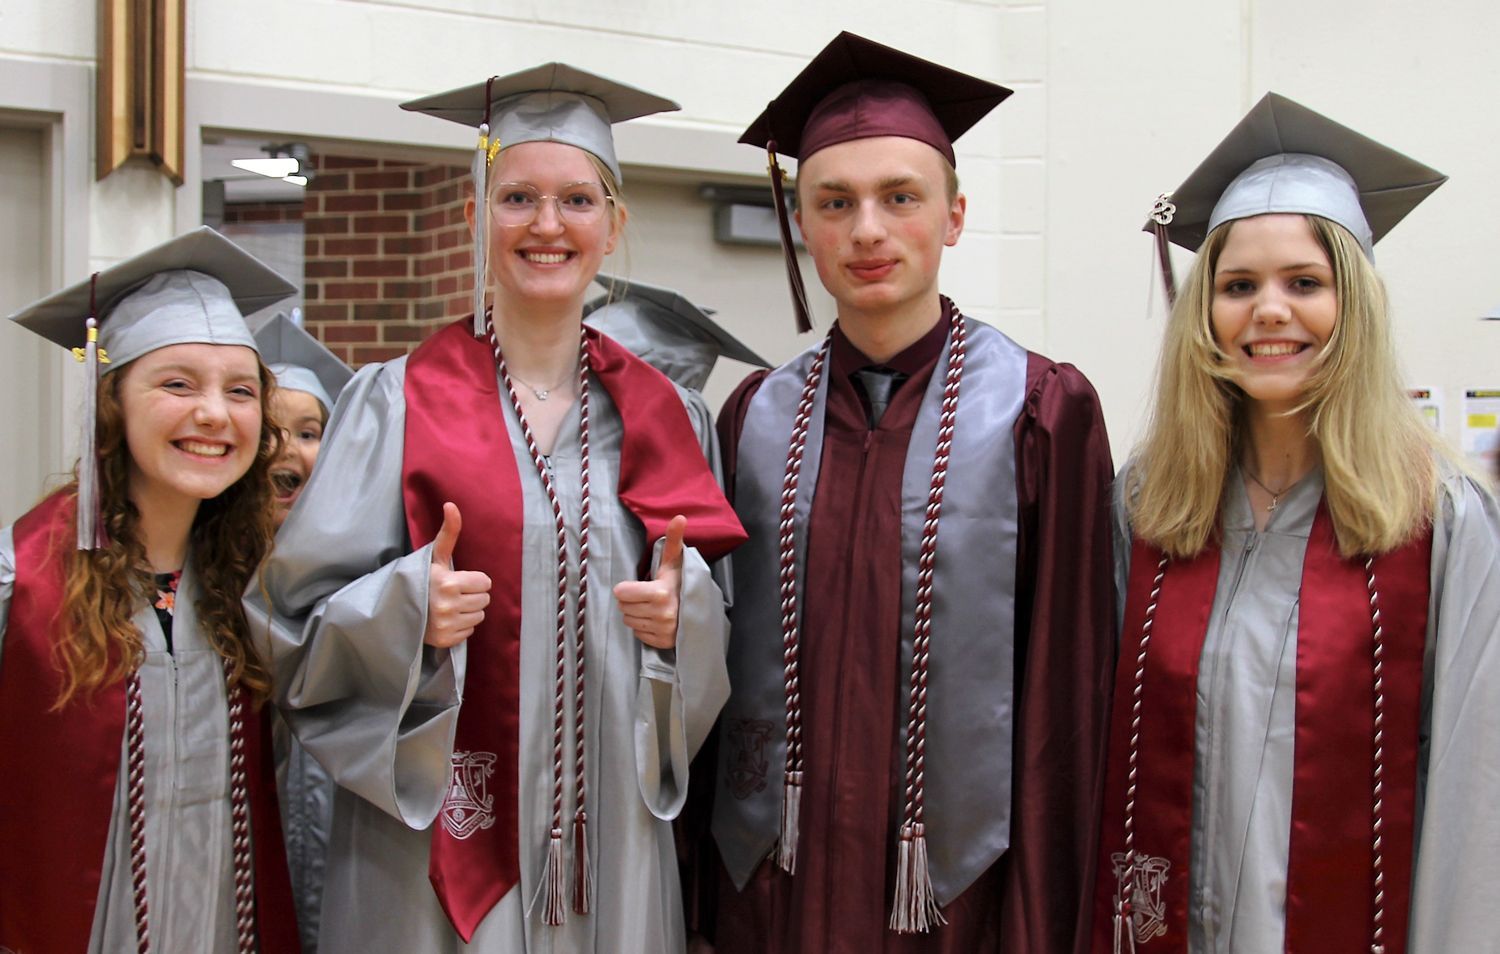 Three girls and one guy, all with stoles and cords, smiling for the camera